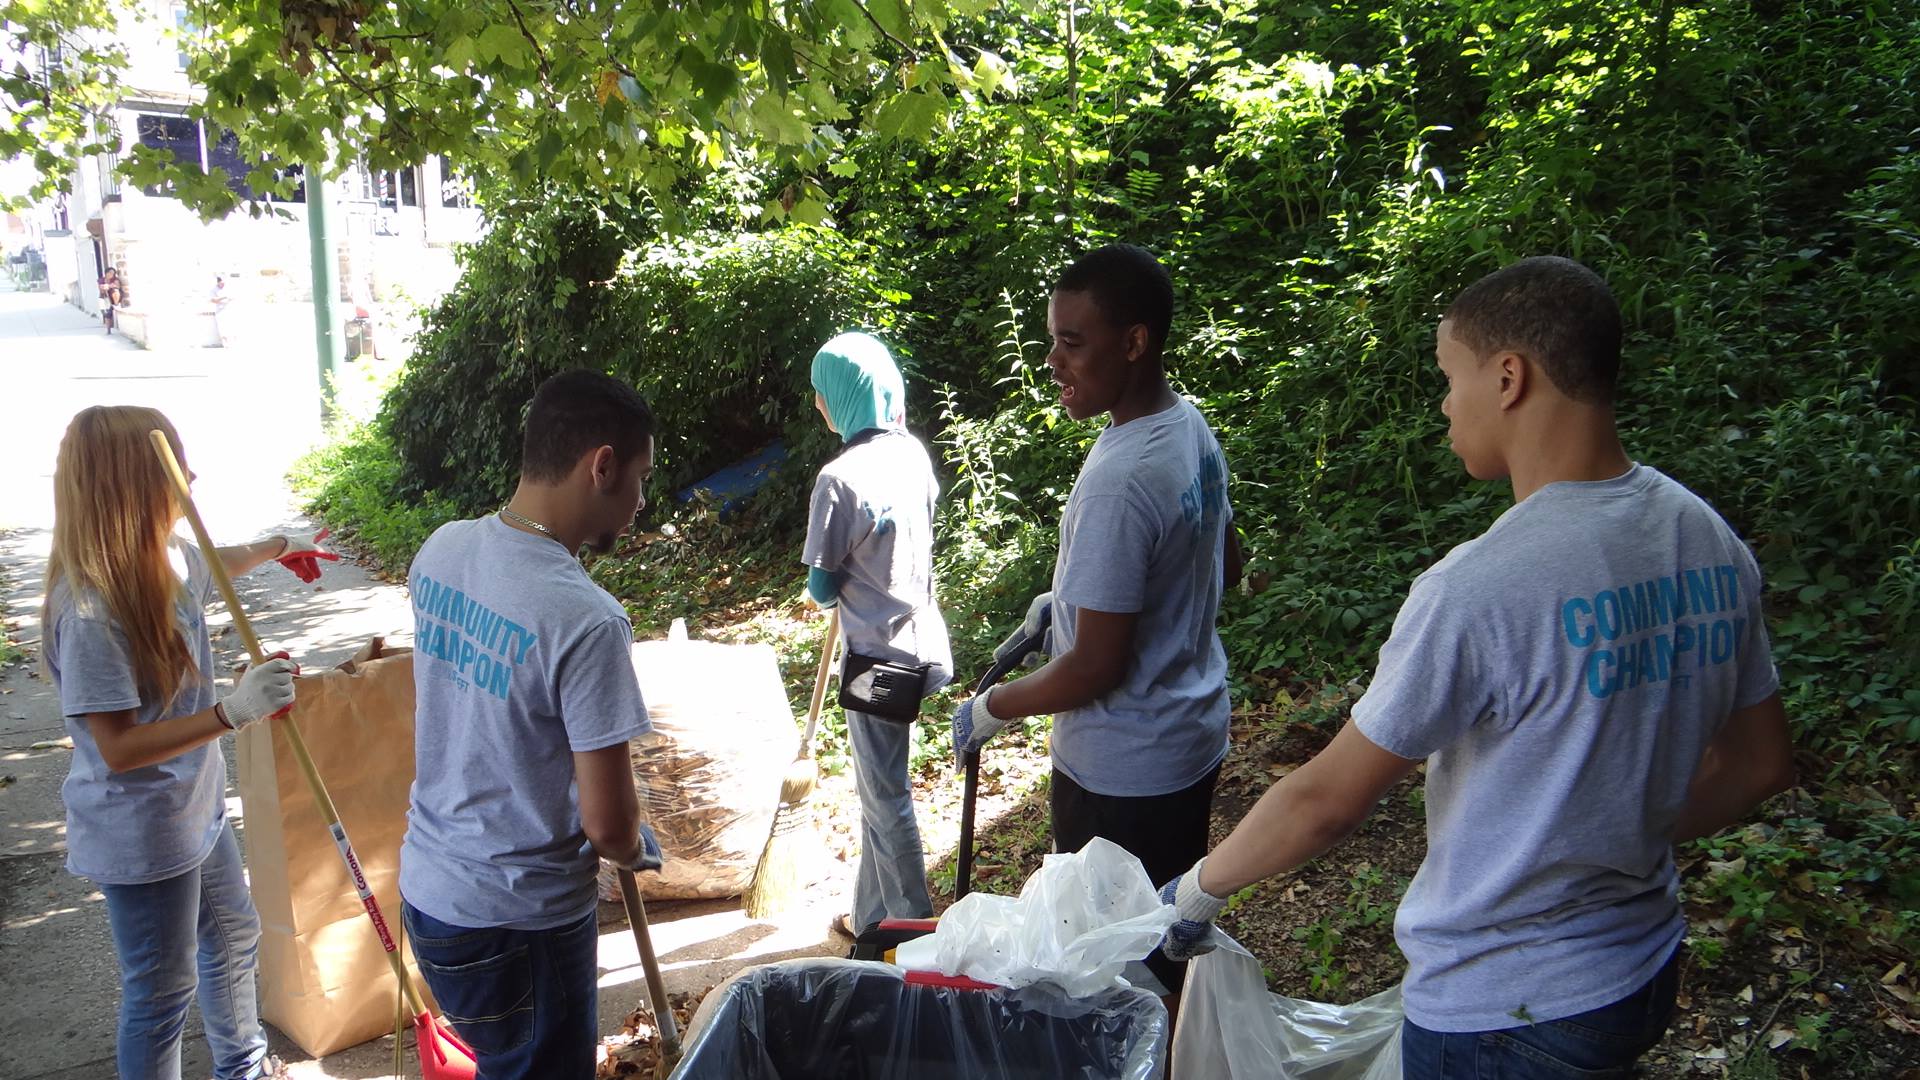 Microgrants Fund Teens Cleaning Up North 5th Street, Anti-Litter Art, and A Tool Library